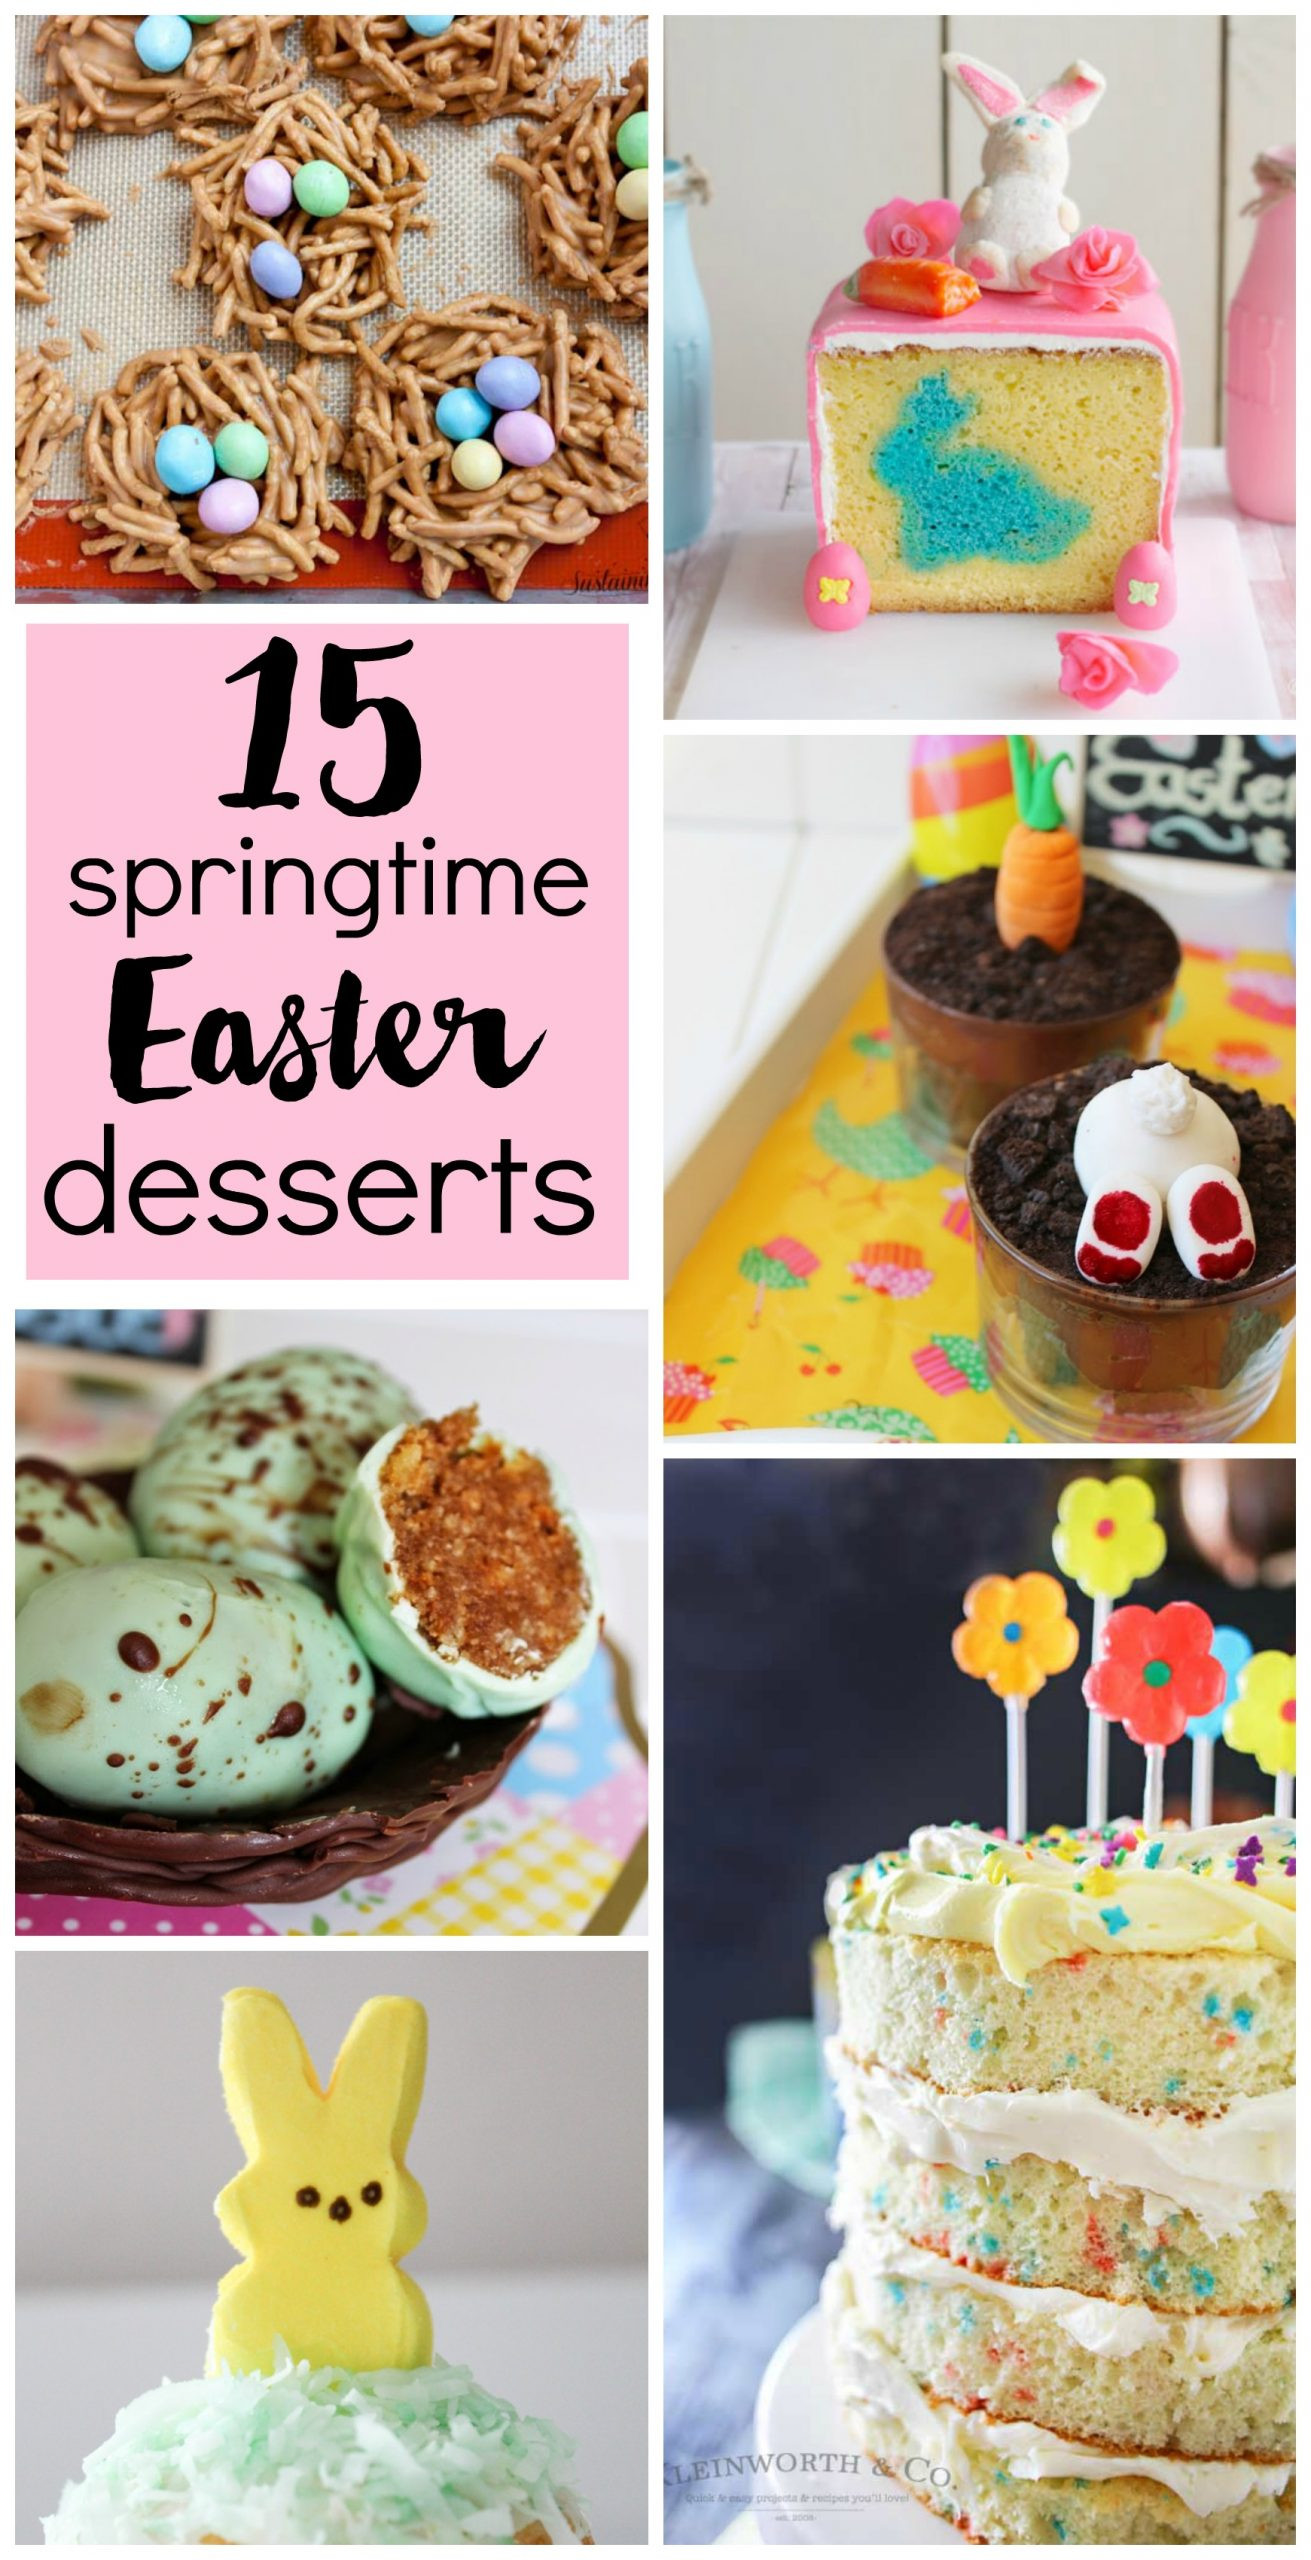 Easy Desserts For Easter
 15 Springtime Easter Desserts A Savory Feast